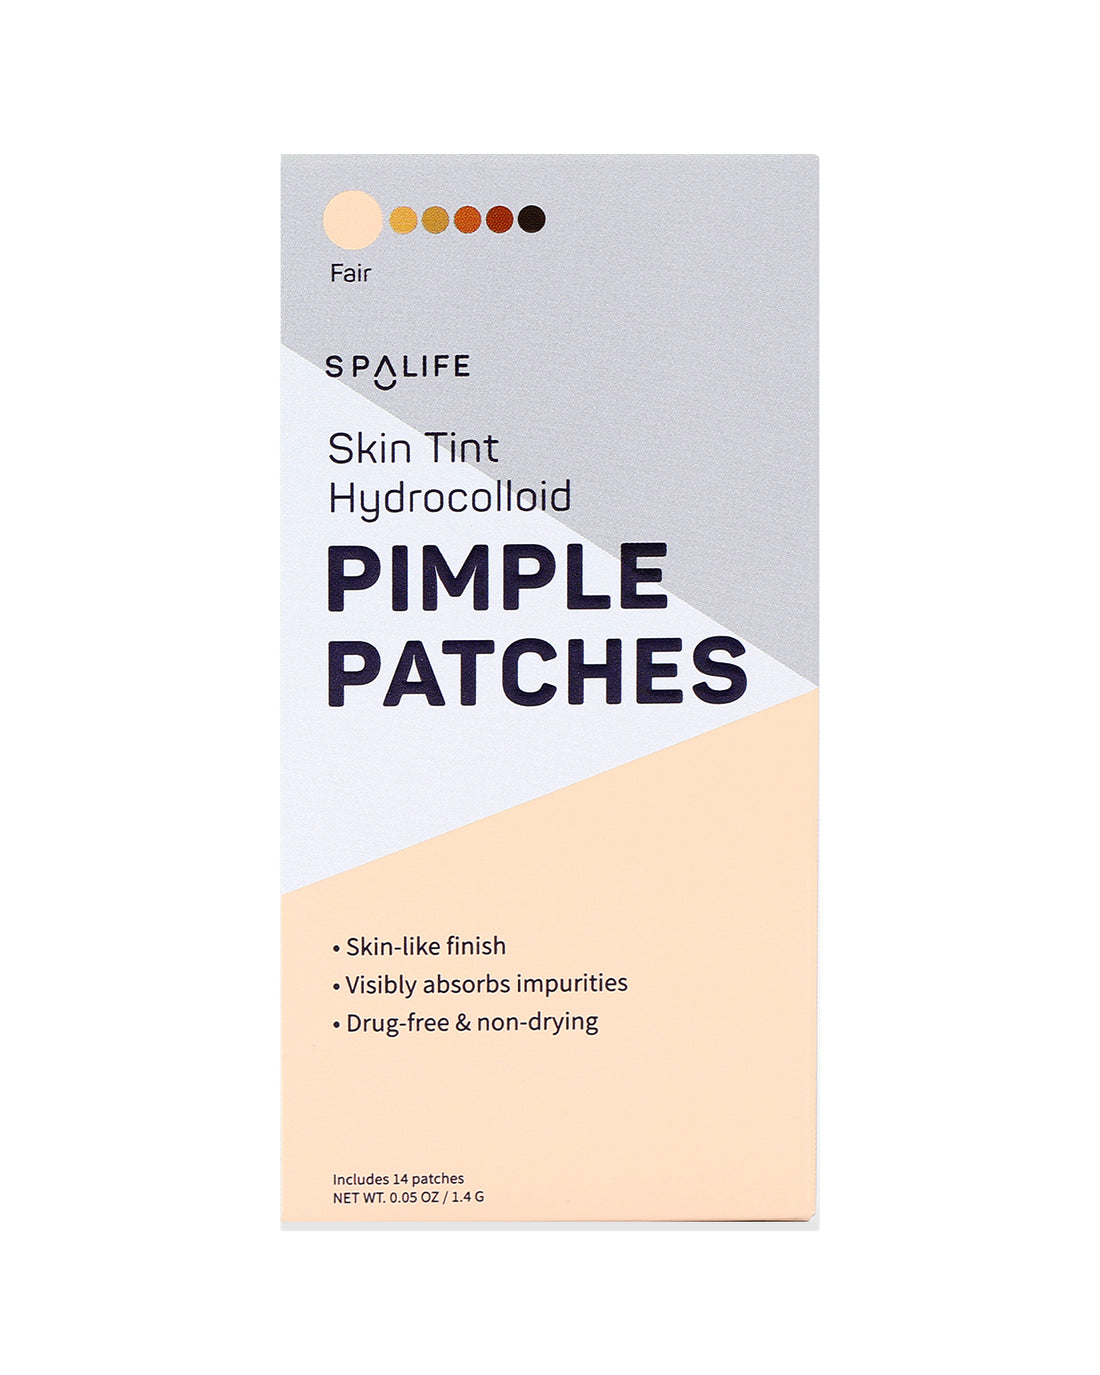 Skin_tint_pimple_patches_packe-457